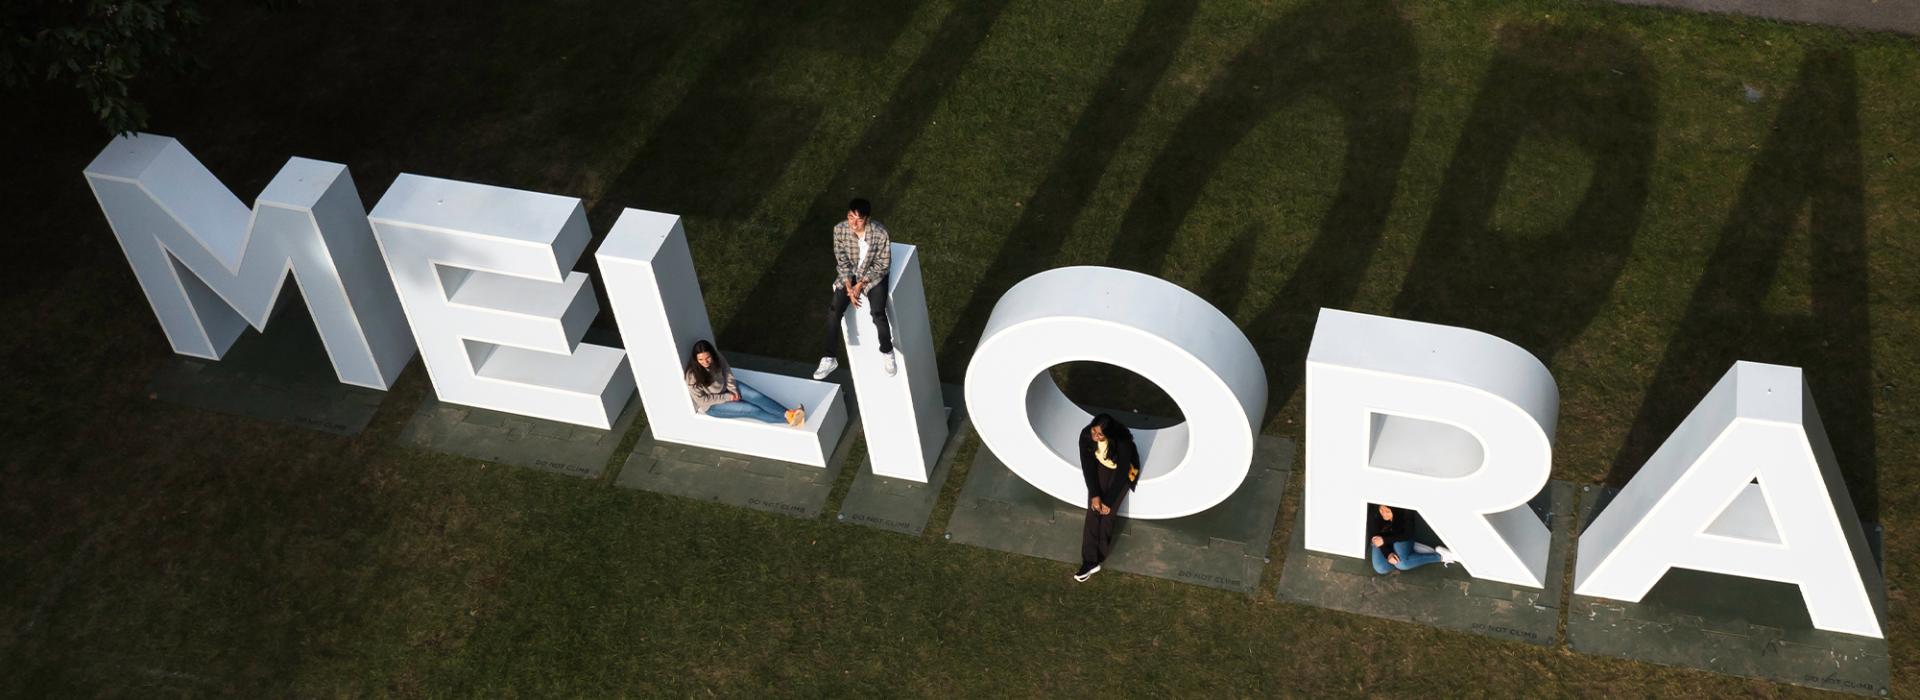 Ariel view of "Meliora" sign with students sitting on it